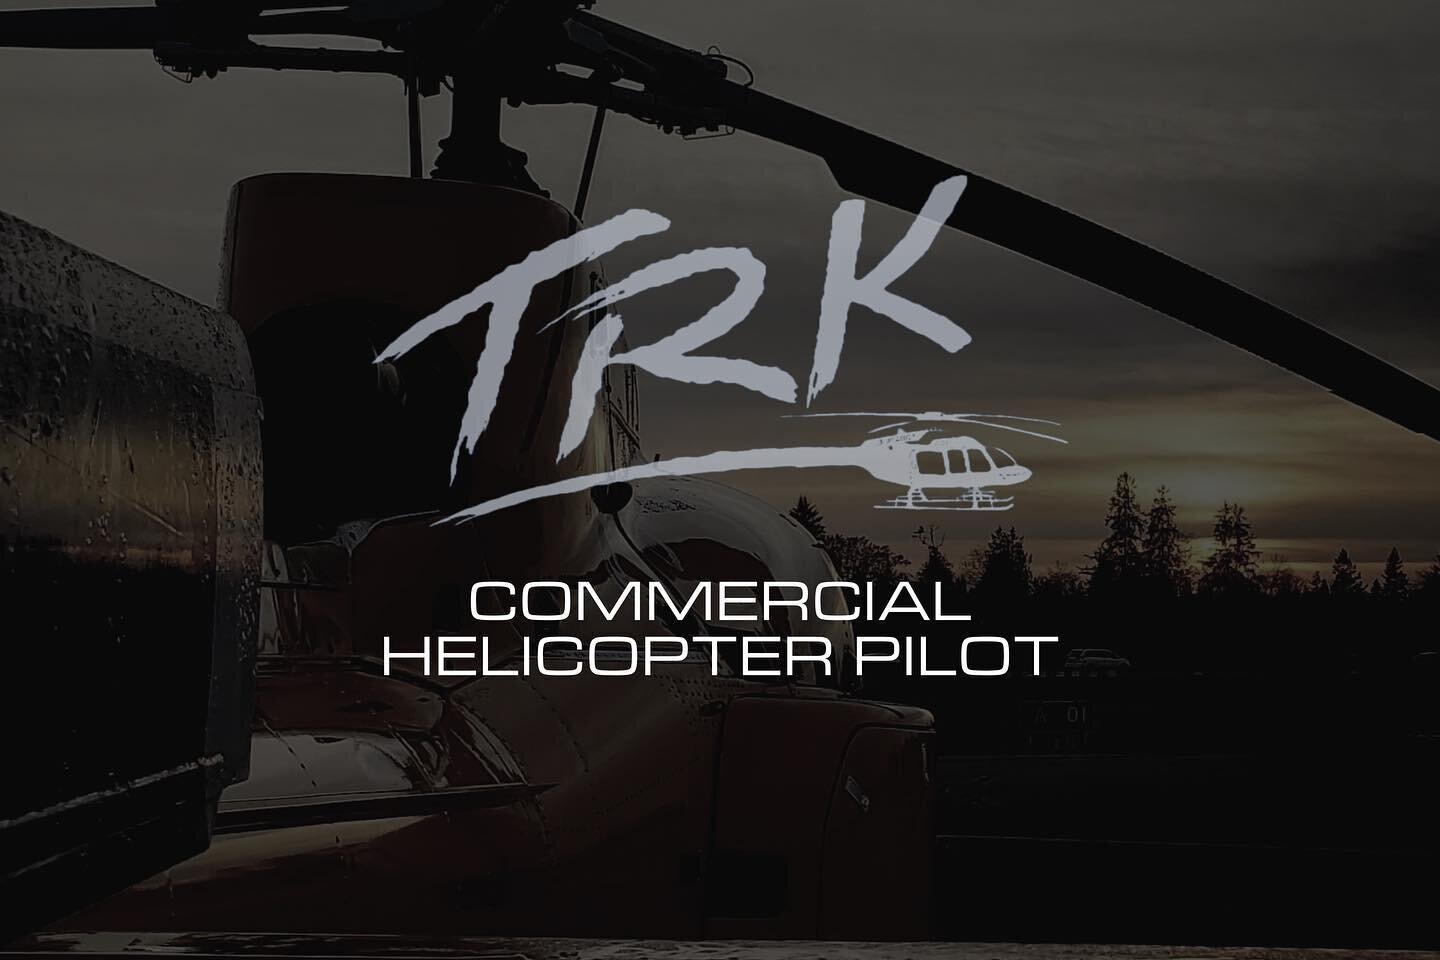 TRK Helicopters is currently hiring Bell Medium &amp; AS350 Series pilots (full time, part time &amp; contract positions available).

Our diverse fleet currently consists of AS350, Bell 206, 205, 212 and 412 series aircraft (14 in total). 🚁 

As a c